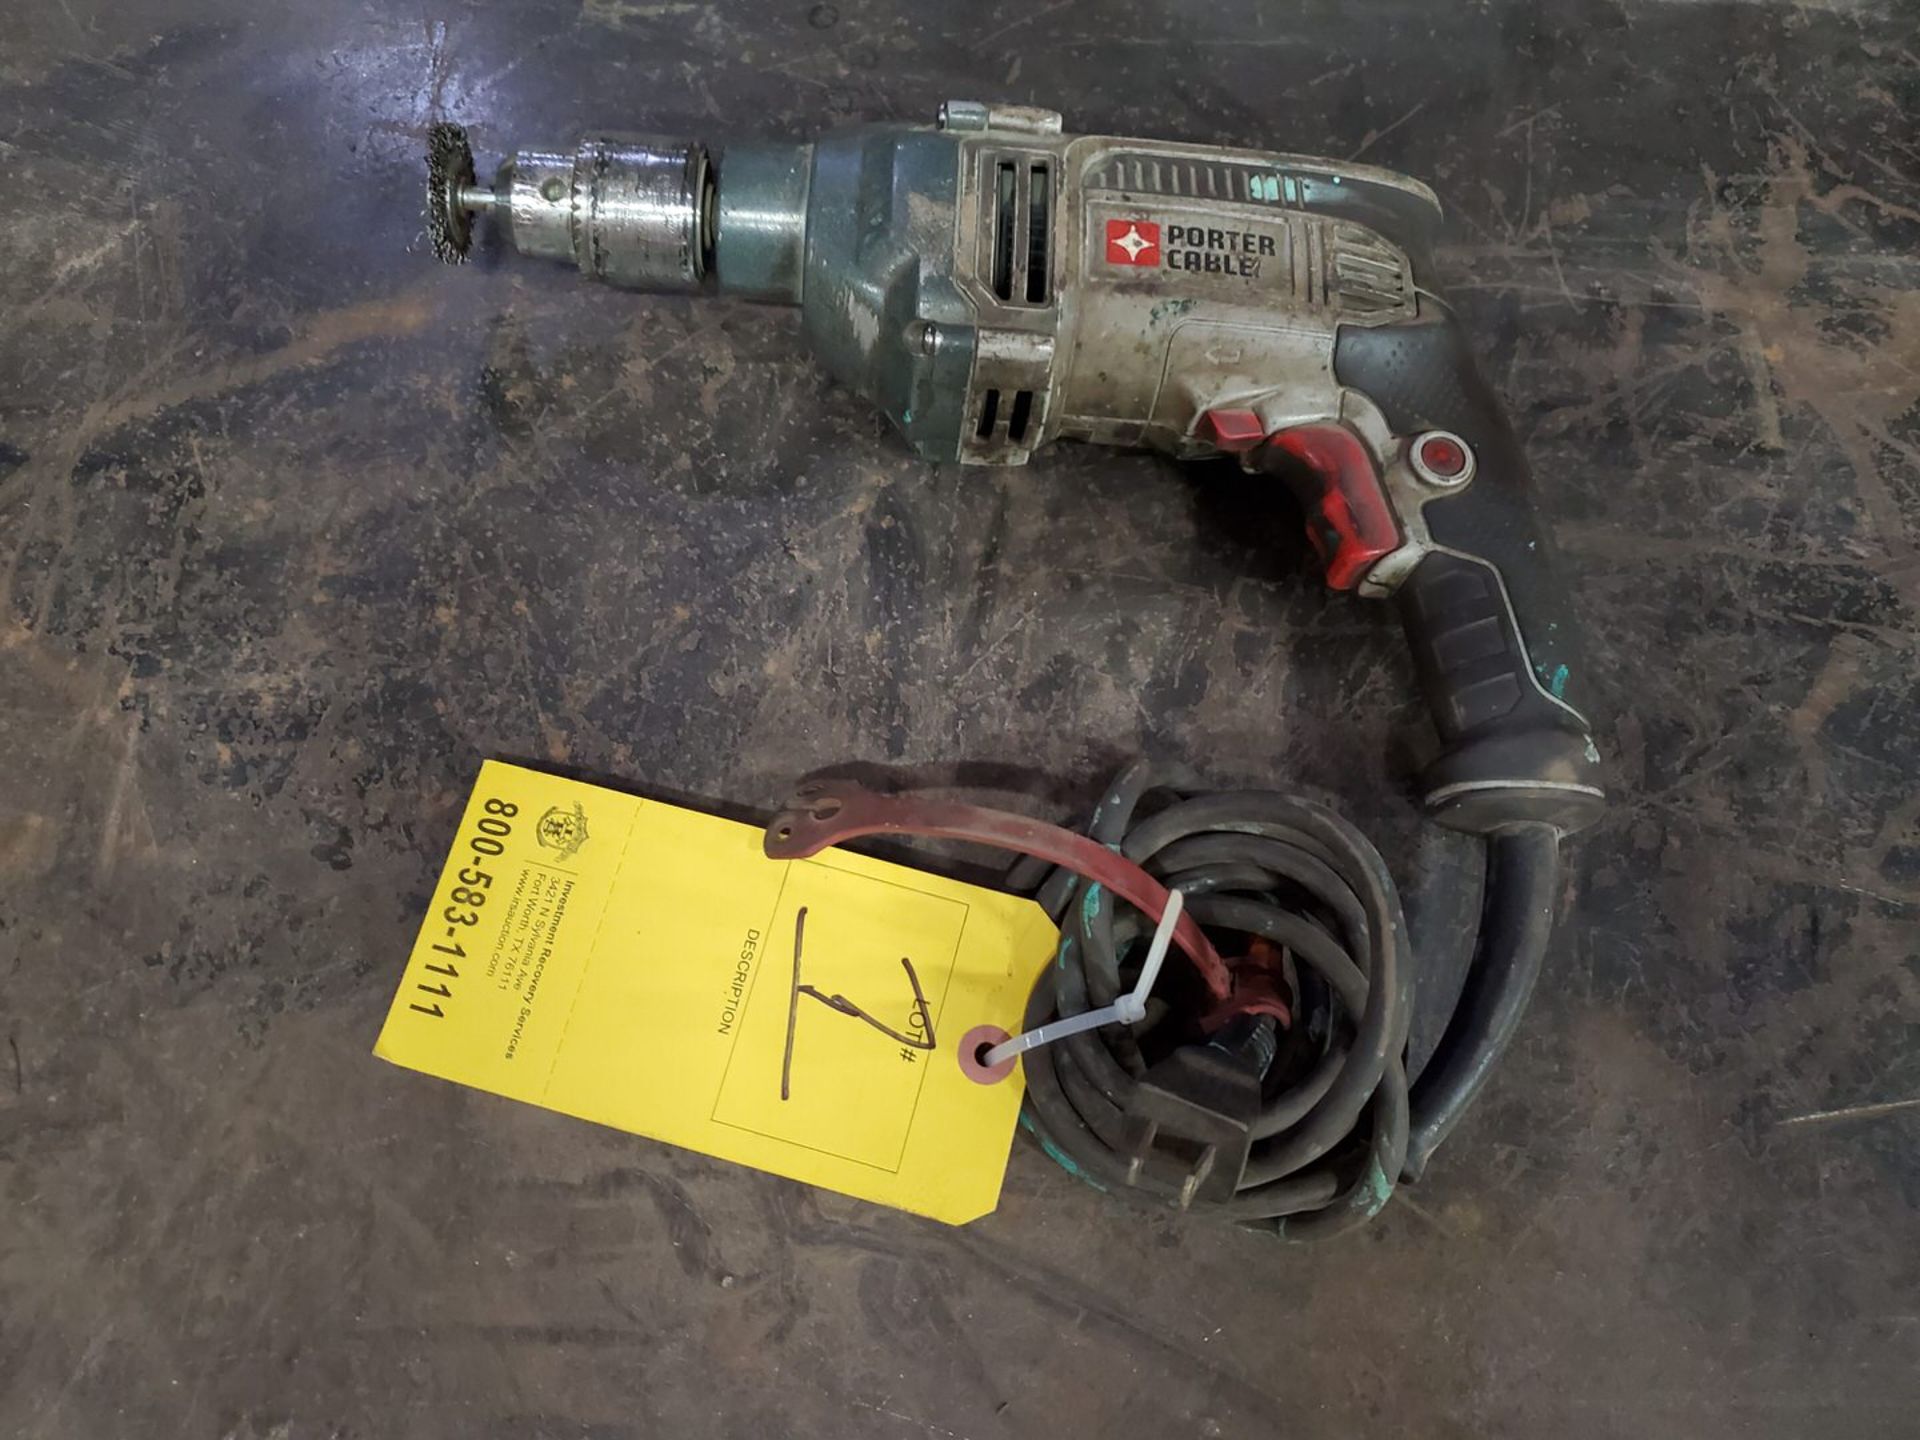 Porter Cable 1/2"" Corded Drill 120V, 50/60HZ